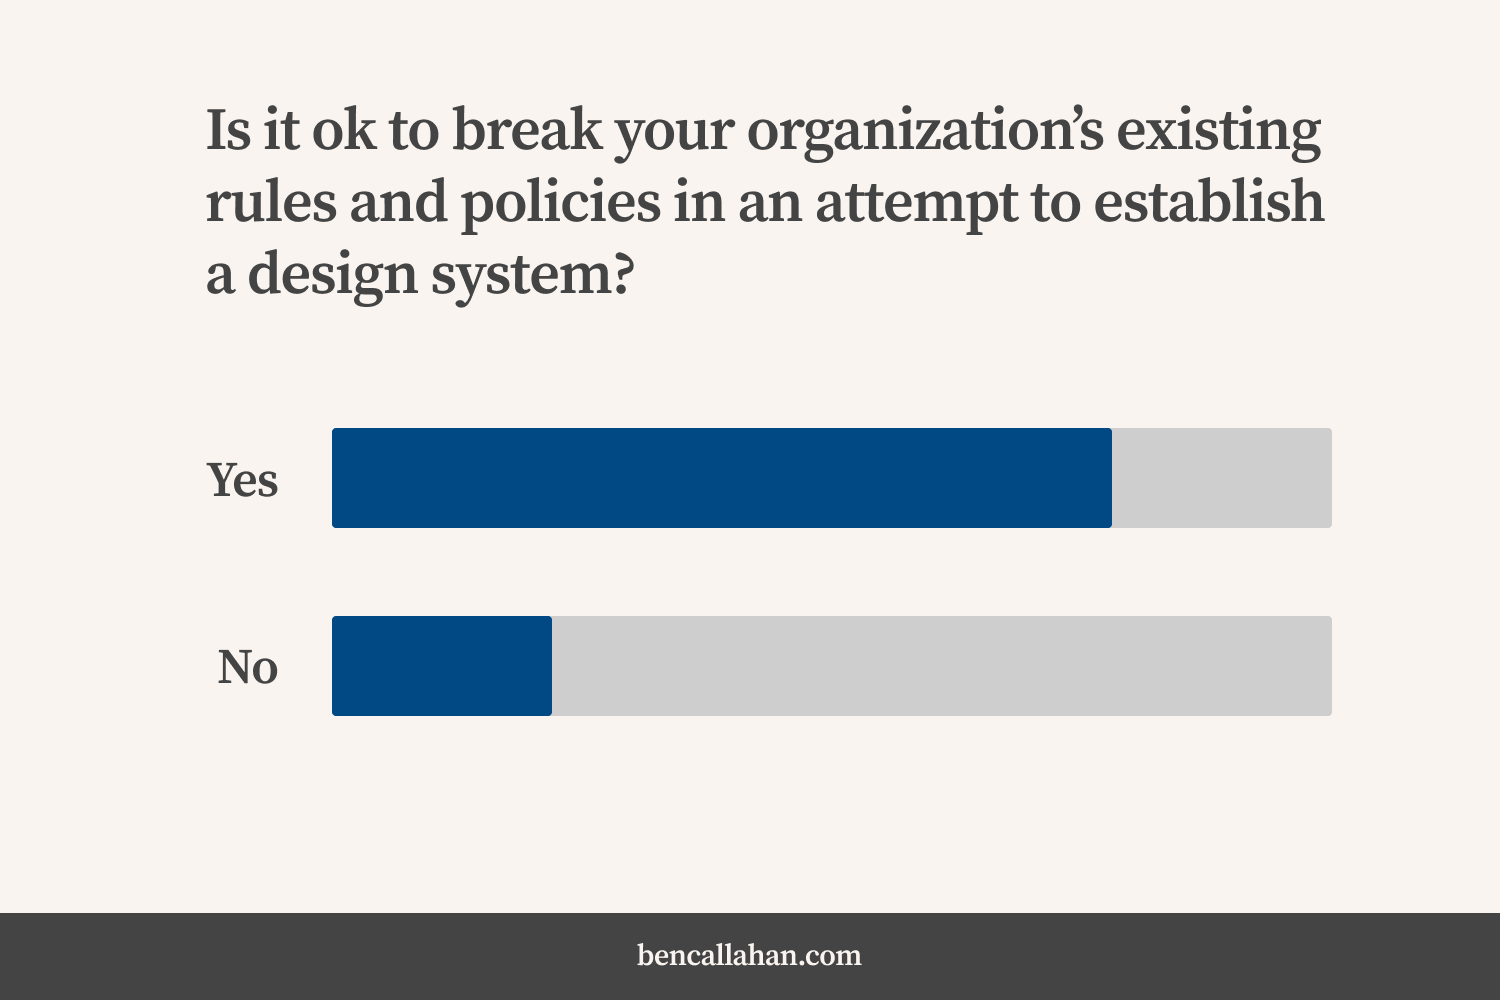 In response to the question, “Is it ok to break your organization's existing rules and policies in an attempt to establish a design system?”: a large majority of respondents said yes.